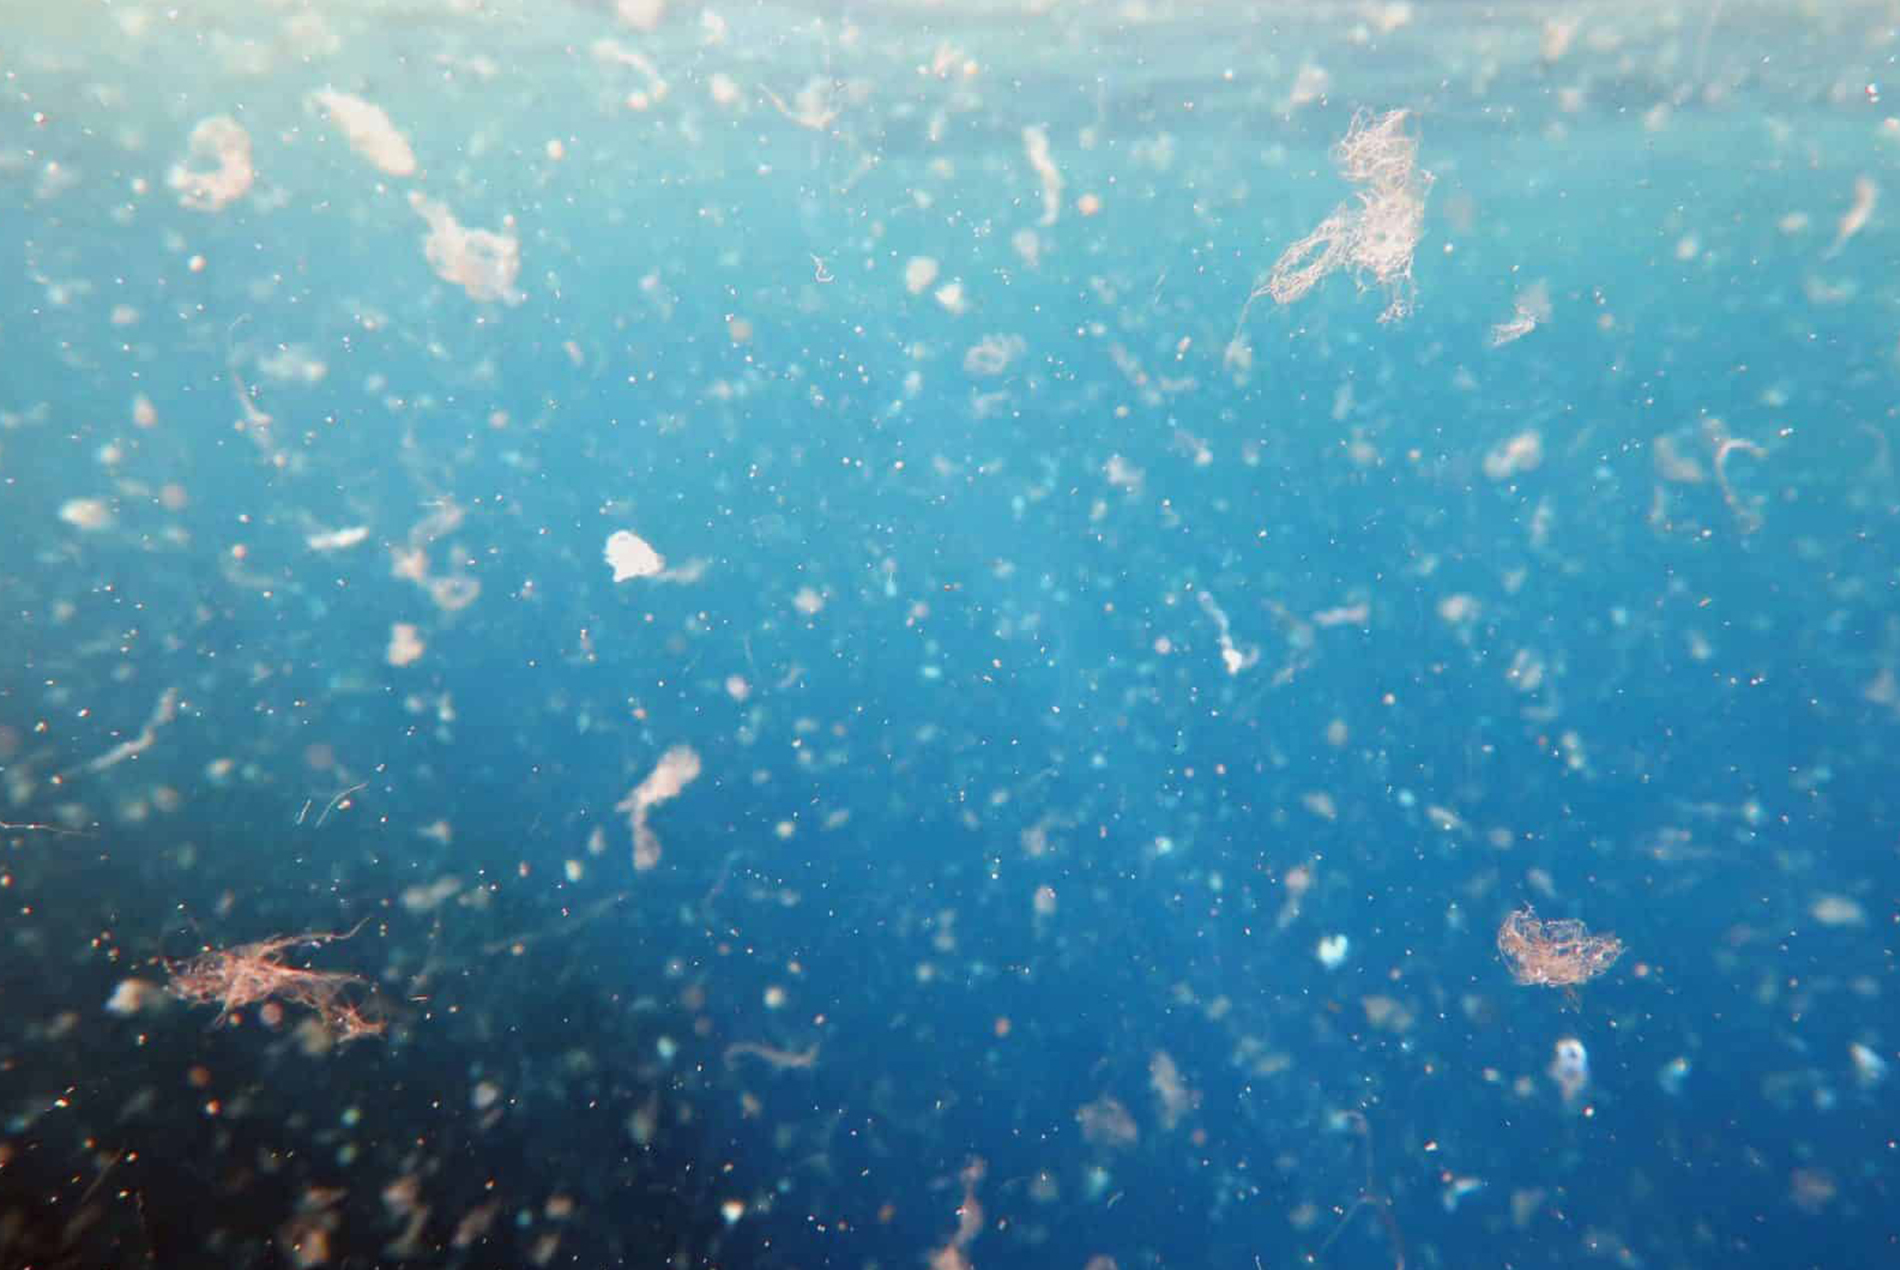 Water Quality and the Global Microplastic Crisis